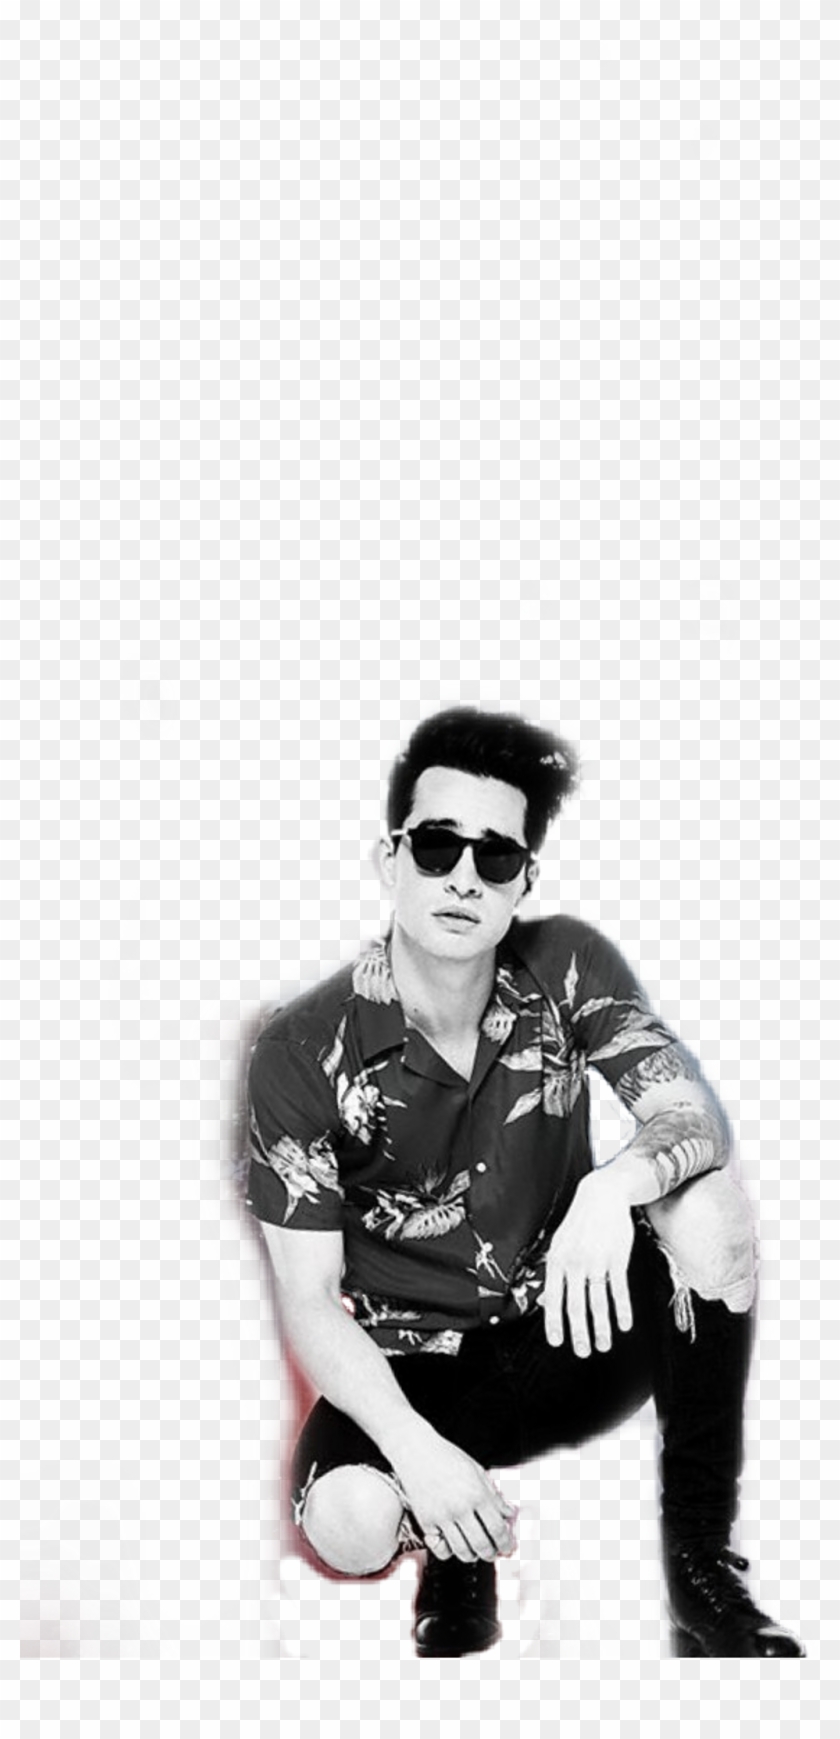 ##panicatthedisco #brendonurie #brendon #urie #panic - Hot Brendon Urie Edit Clipart #1347401